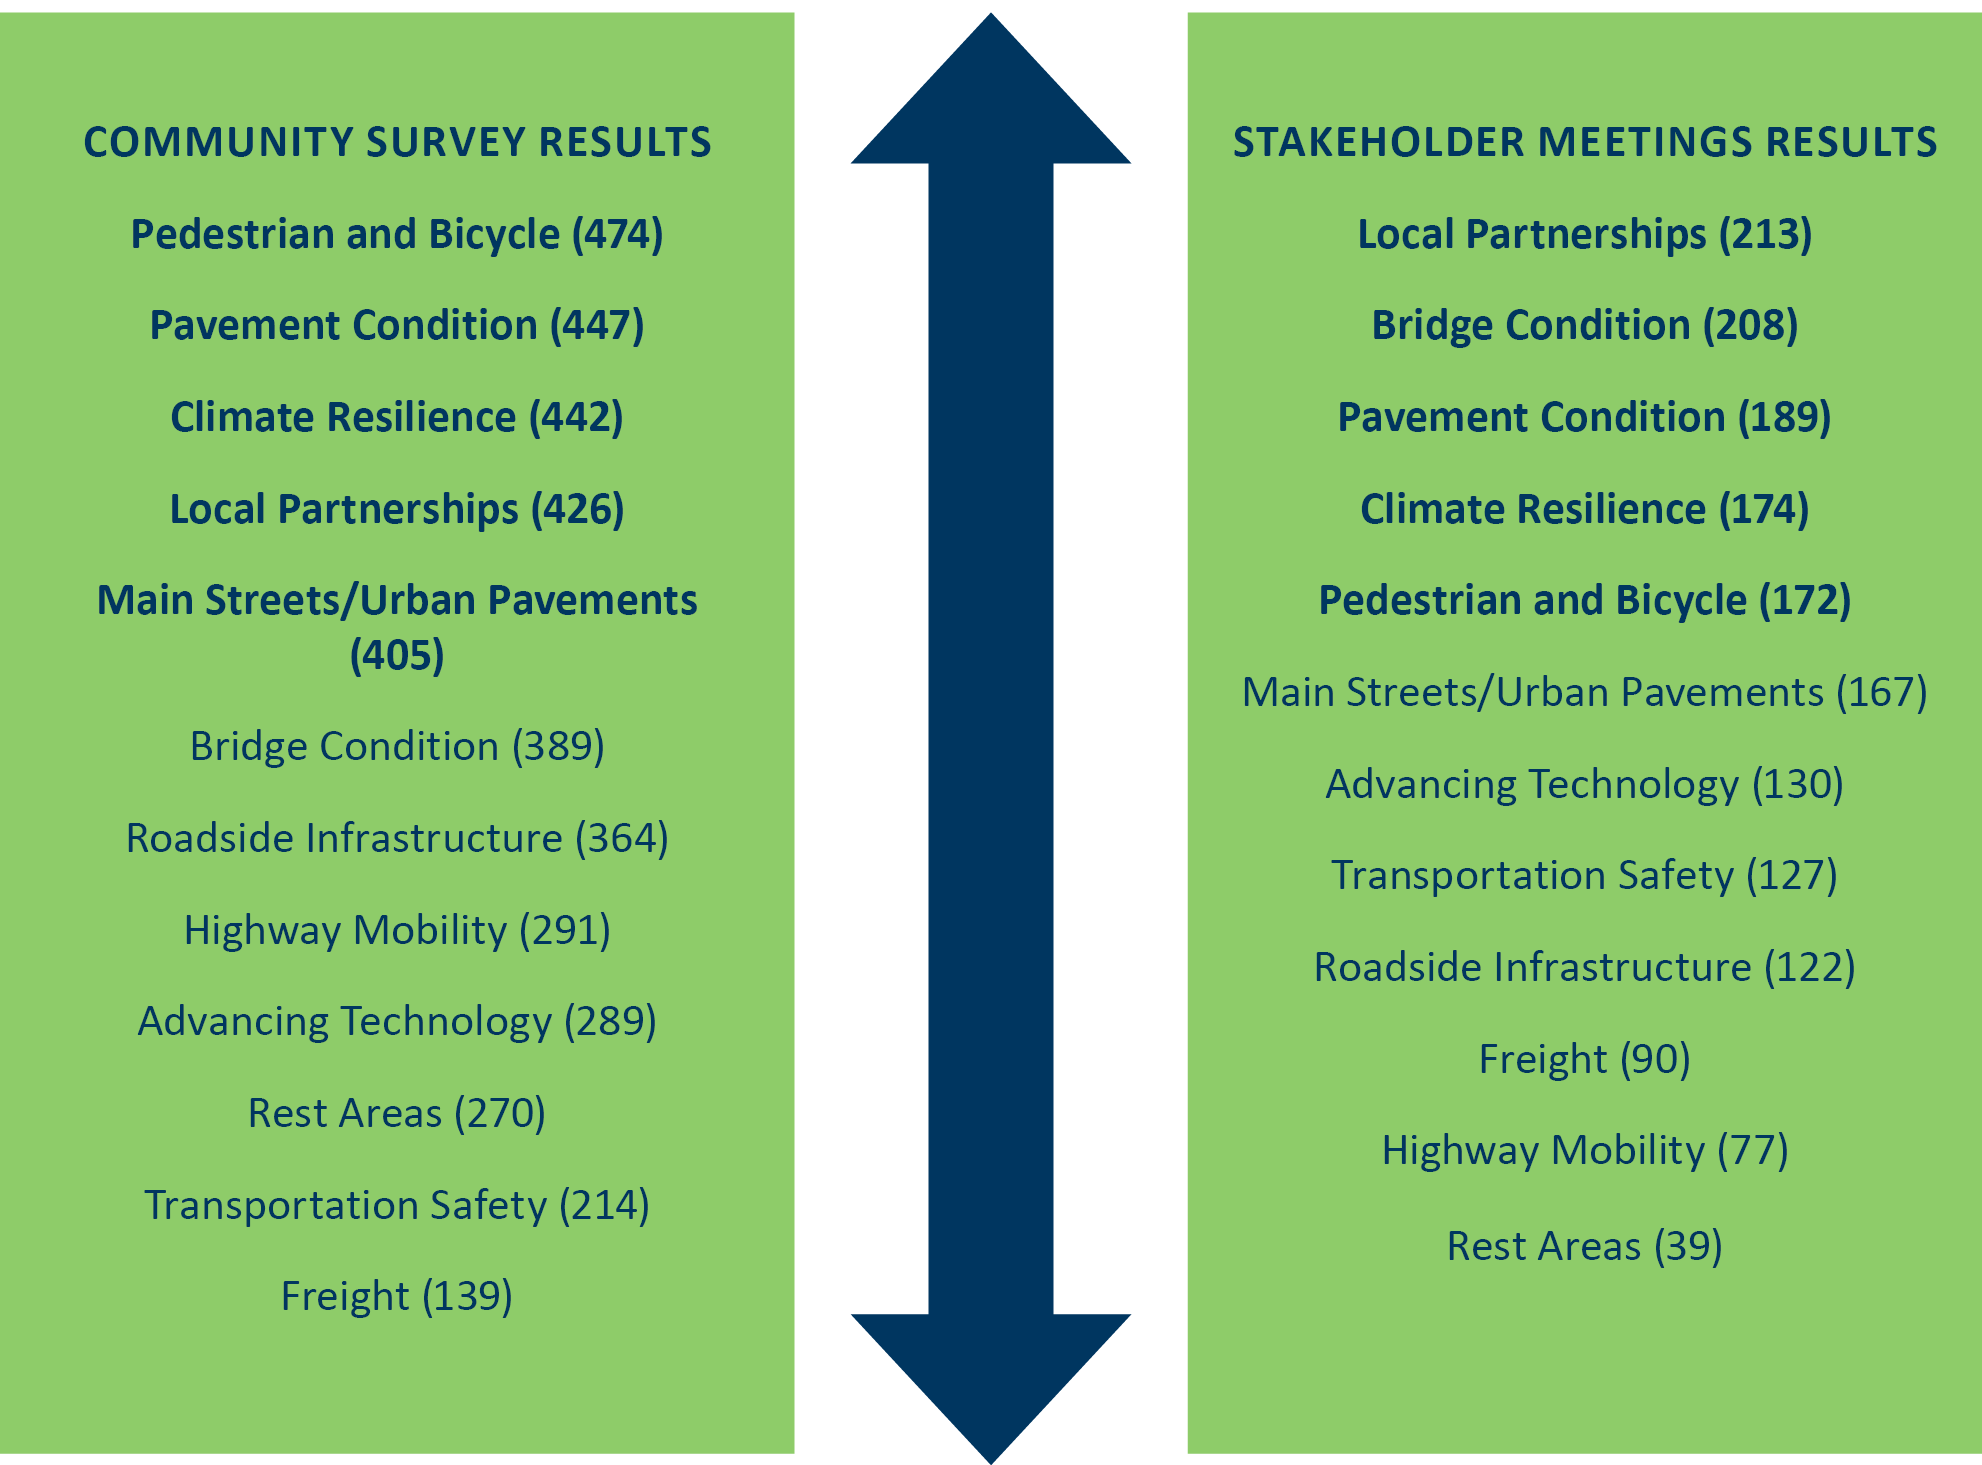 A graphic showing the number of responses and the needs of community members and stakeholders. Community survey prioritizing, Pedestrian and bicycle (474) Pavement condition (447) climate resilience (442), Local Partnerships (426), and Main streets/urban pavements. Stakeholder meetings prioritizing: Local Partnerships (213), Bridge condition (208), pavement condition (189), pavement condition (189), Climate Resilience (174), and Pedestrian and Bicycle (172). 